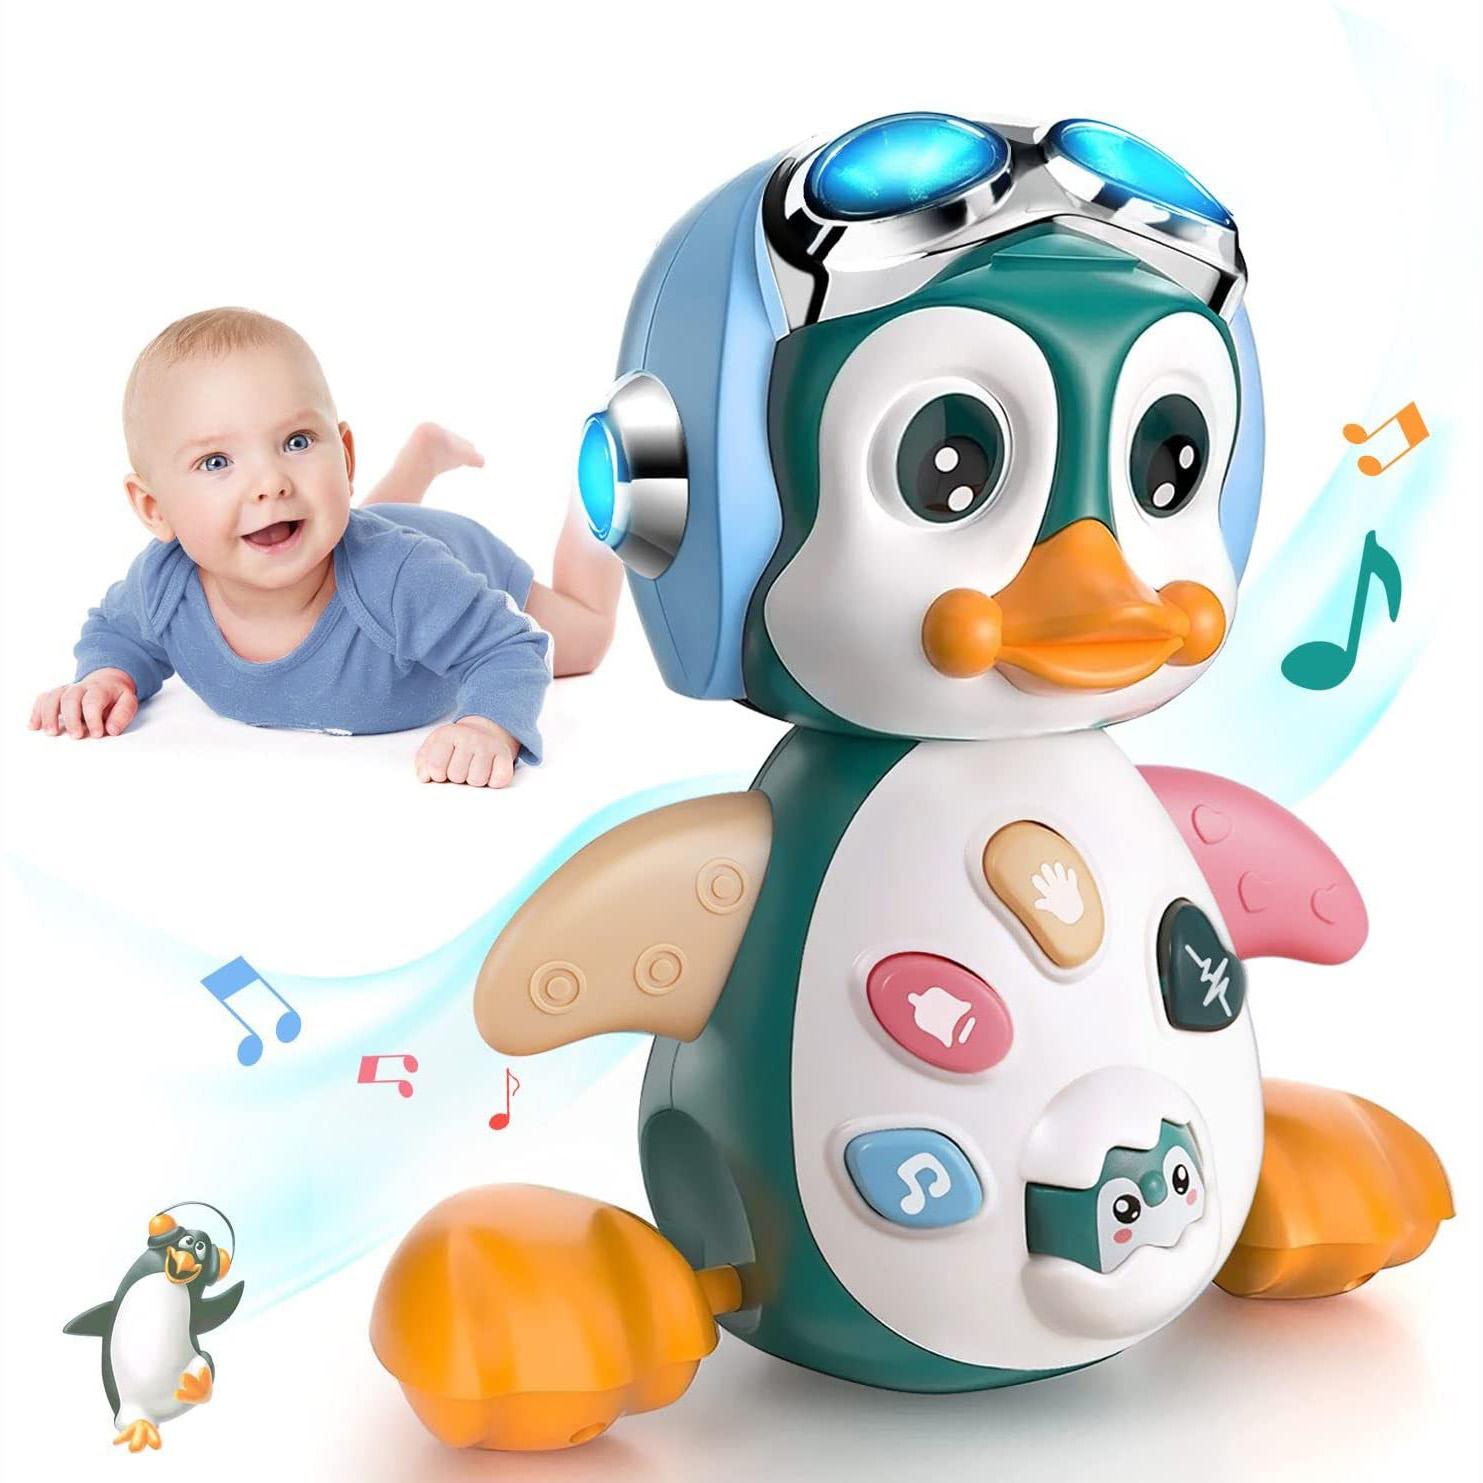 Thriving Toys Baby Musical Toys, Infant Crawling Toy W/Lights Sounds, Interactive Penguin Early Educational Learning Moving Walking Baby Toy,1~3 Year Old Kids